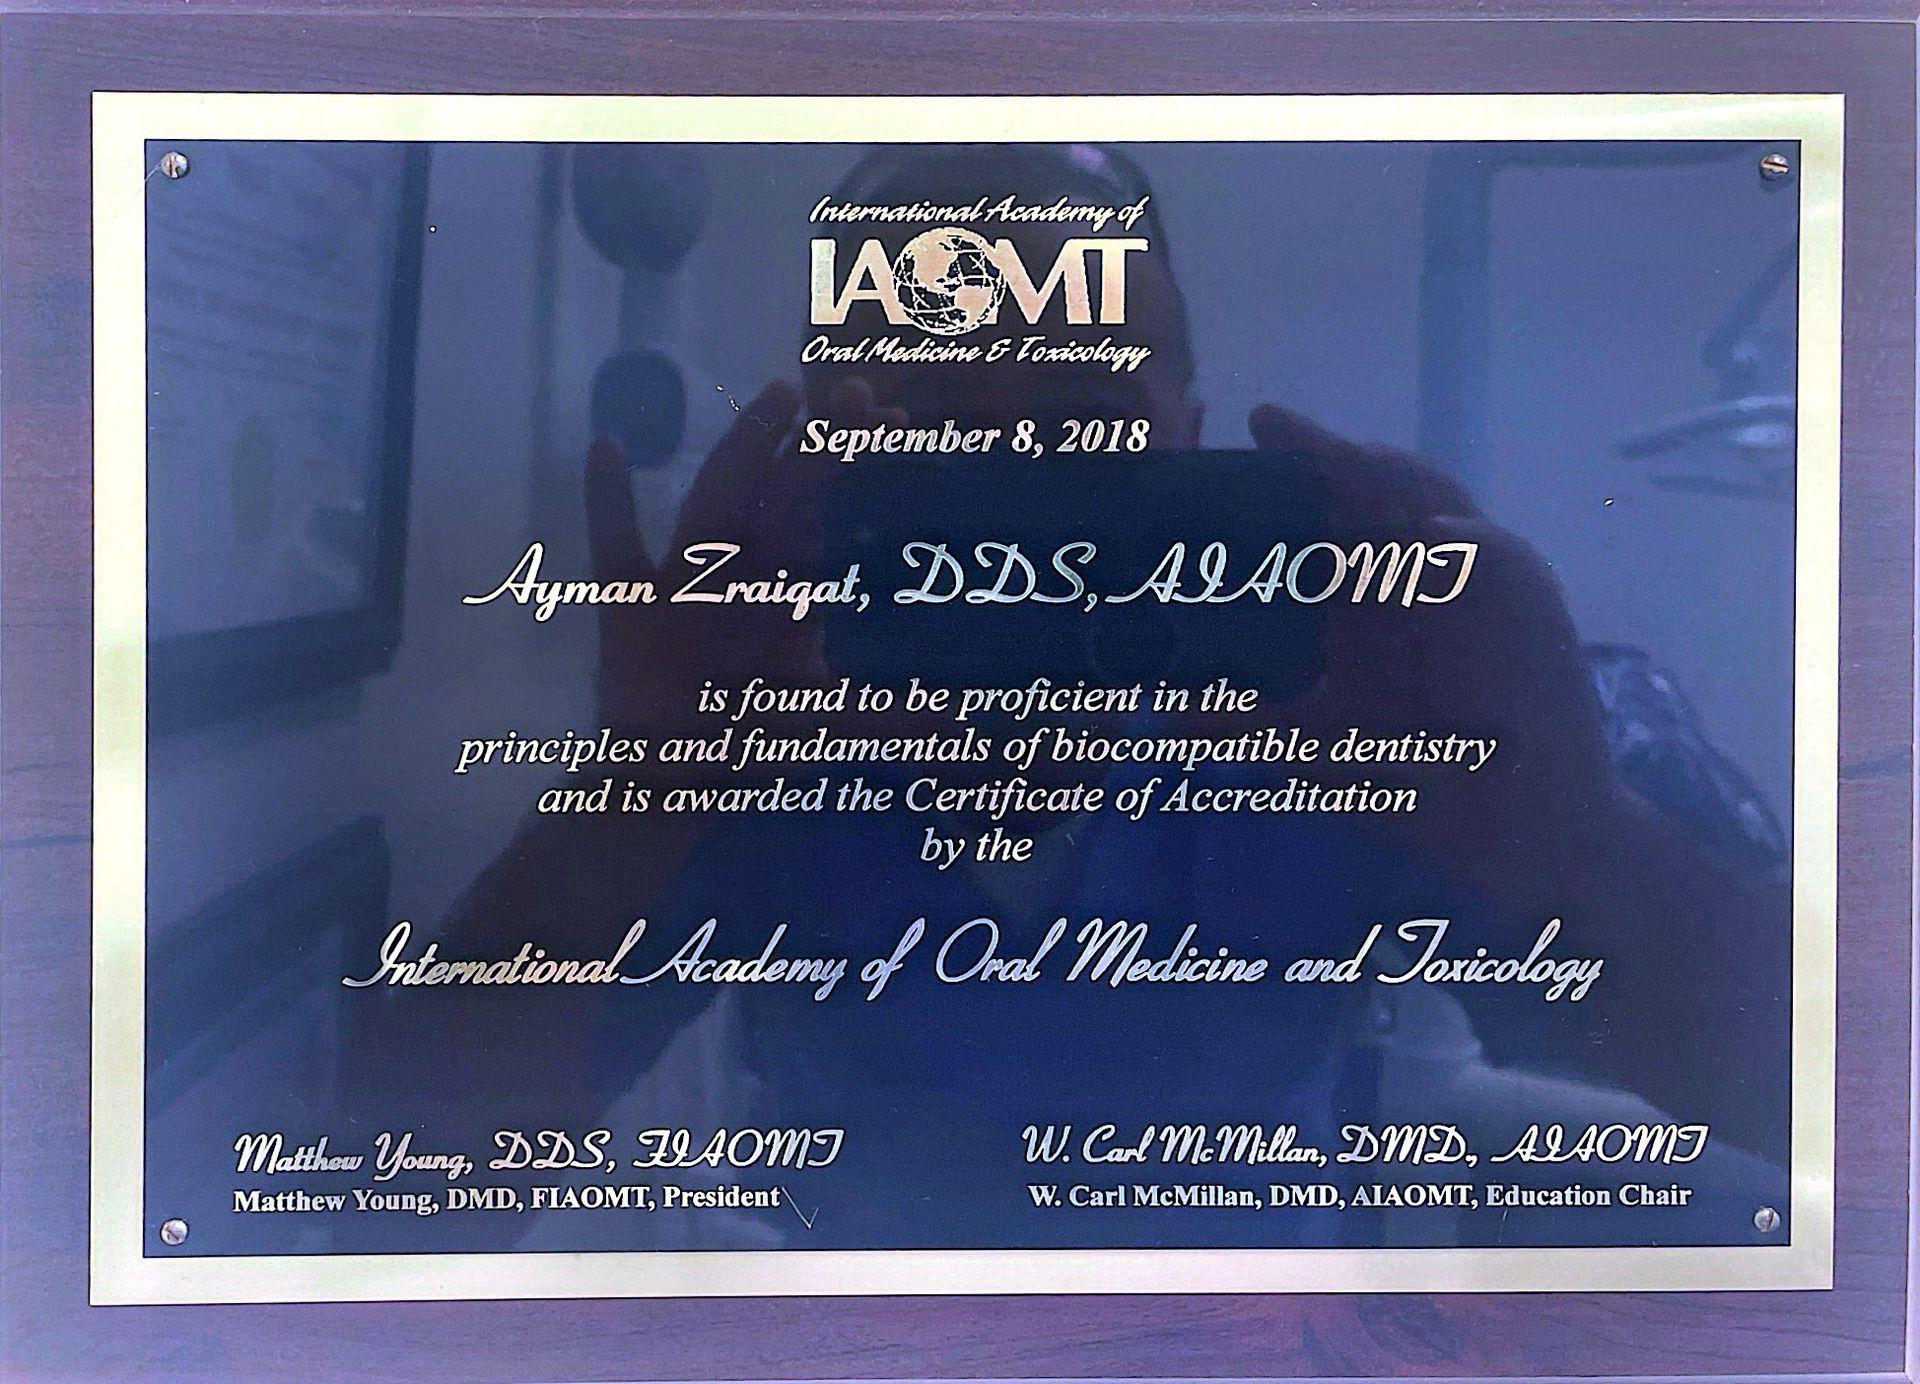 A plaque certifying Ayman Zraigat, DDS, ALAOMT, for proficiency in biocompatible dentistry, awarded by the IAOMT.